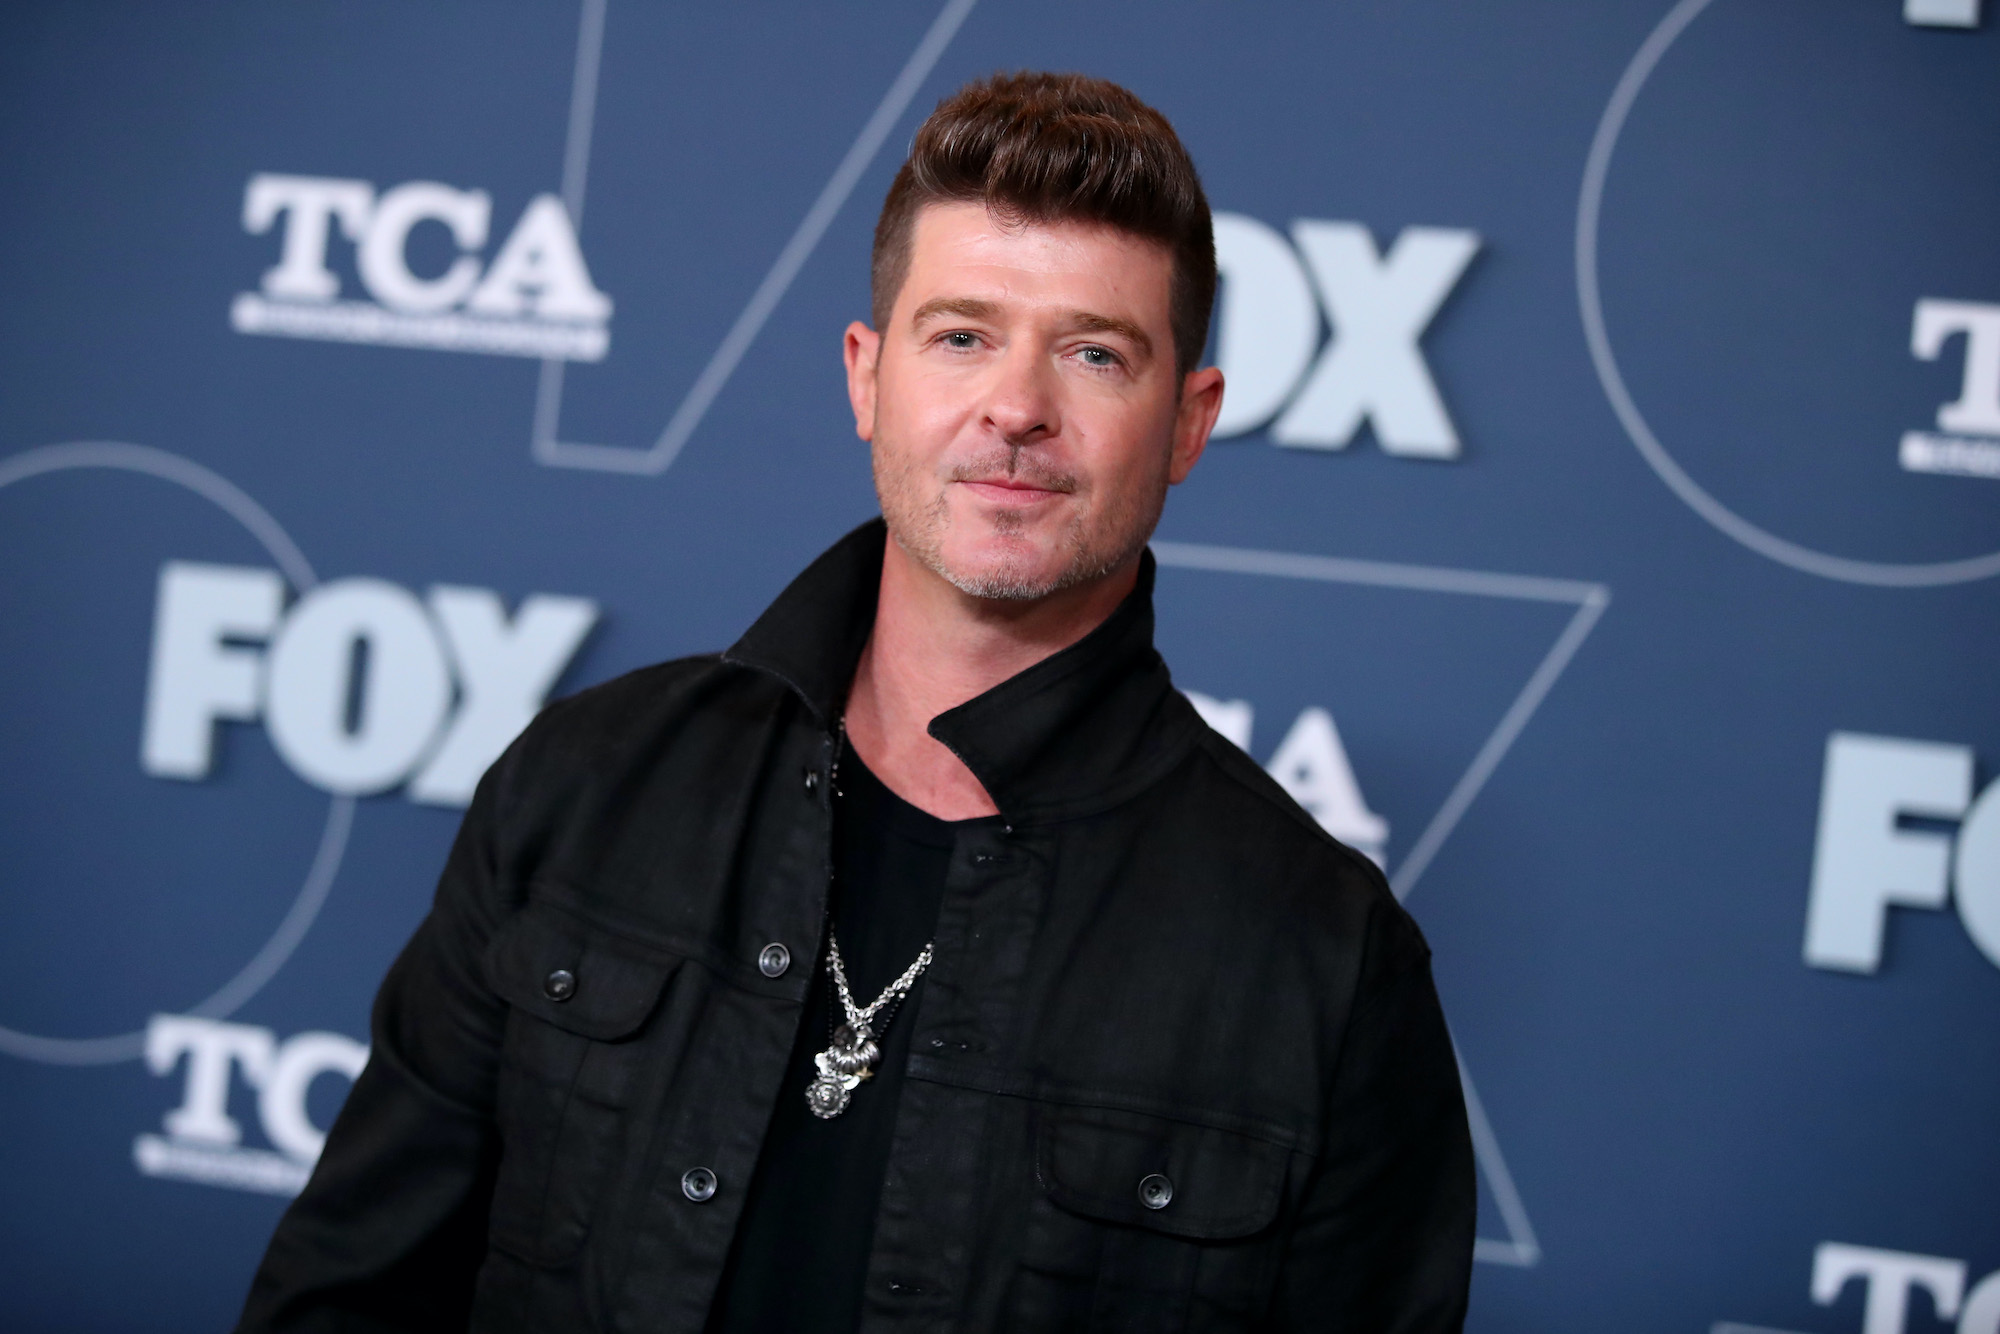 Jay-Z Gave Robin Thicke Great Advice After the ‘Blurred Lines’ Star’s Divorce and Addiction Scandals